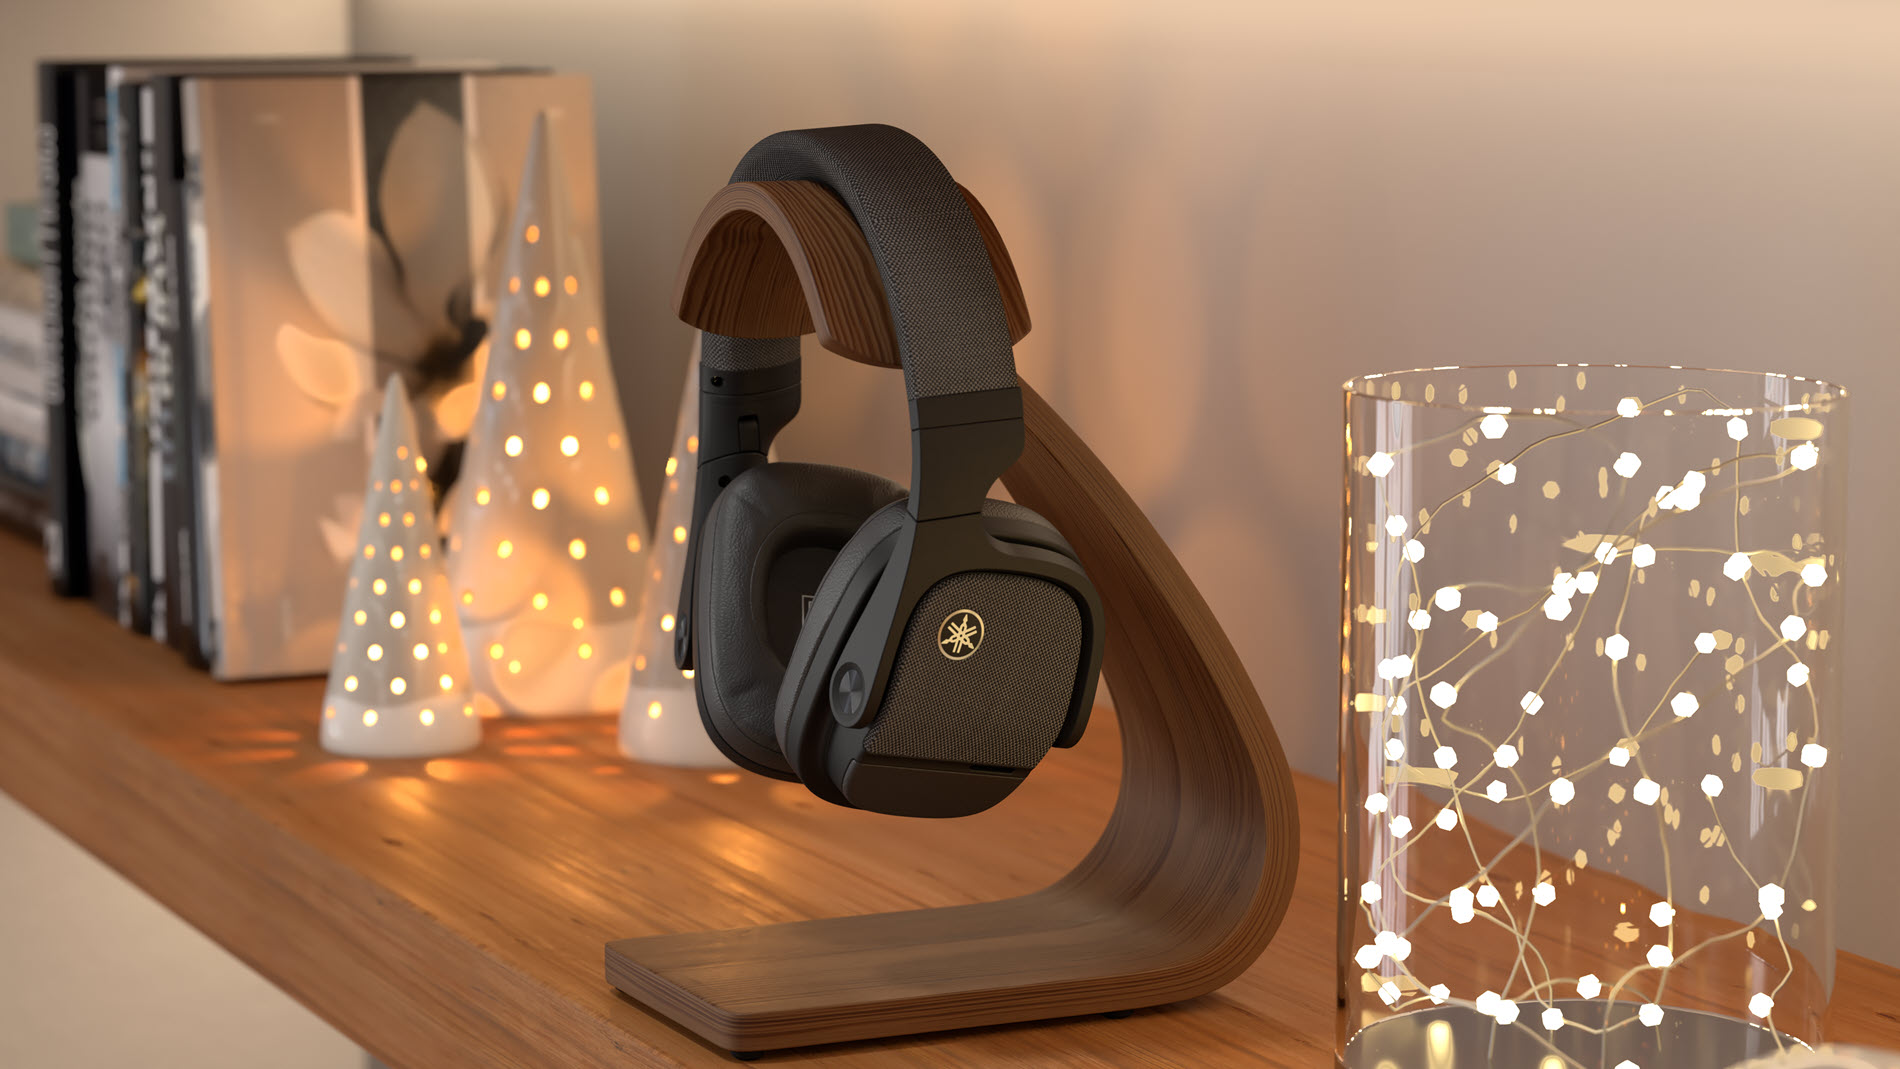 Wireless headphones on a modern wood stand on a bookshelf surrounded by stylish holiday decorations.